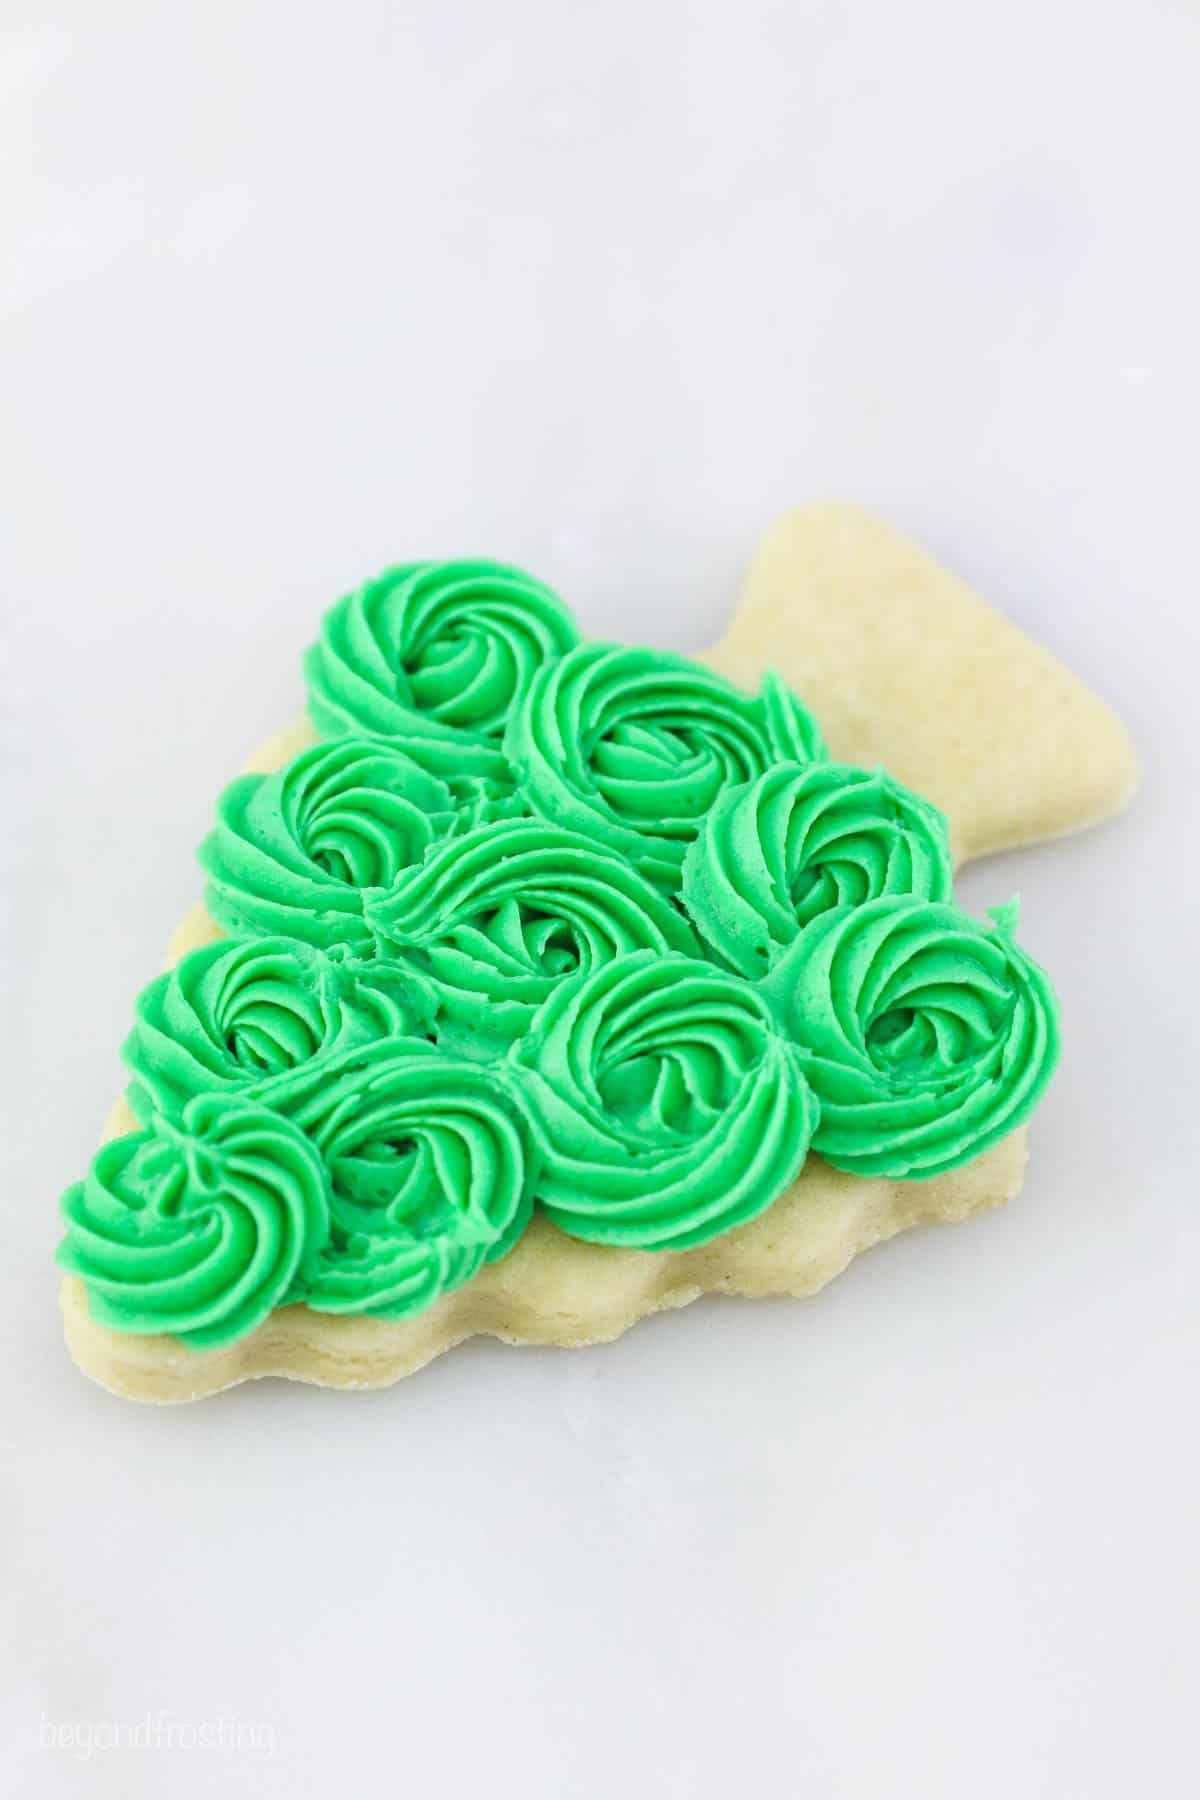 A frosted sugar cookie in the shape of a christmas tree